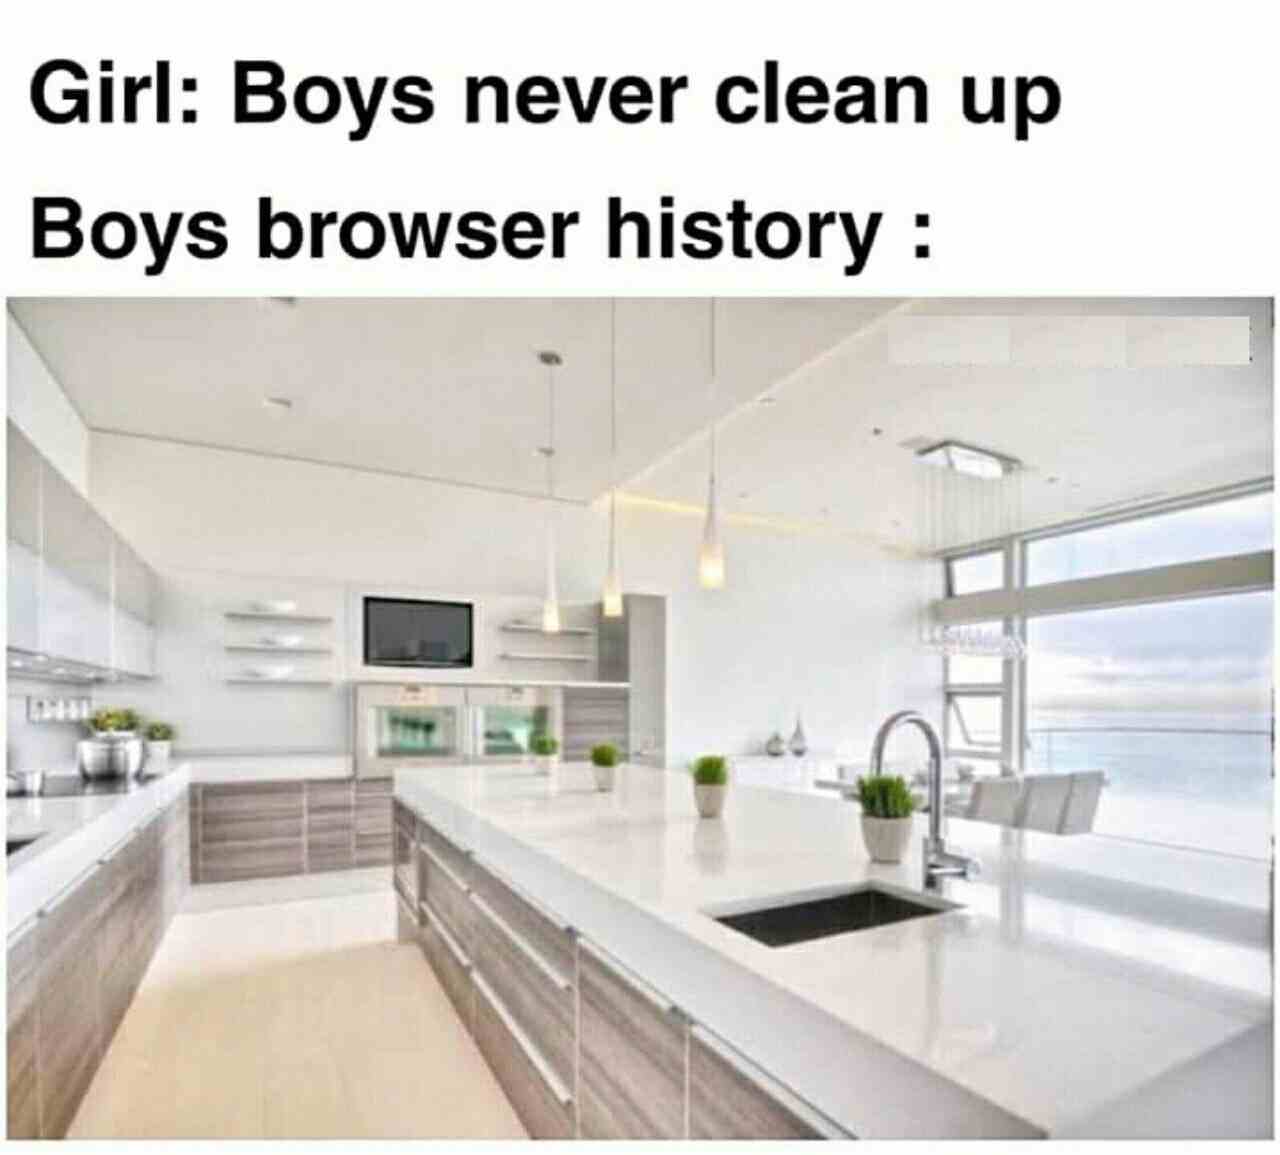 By the way, I never clean my browser history